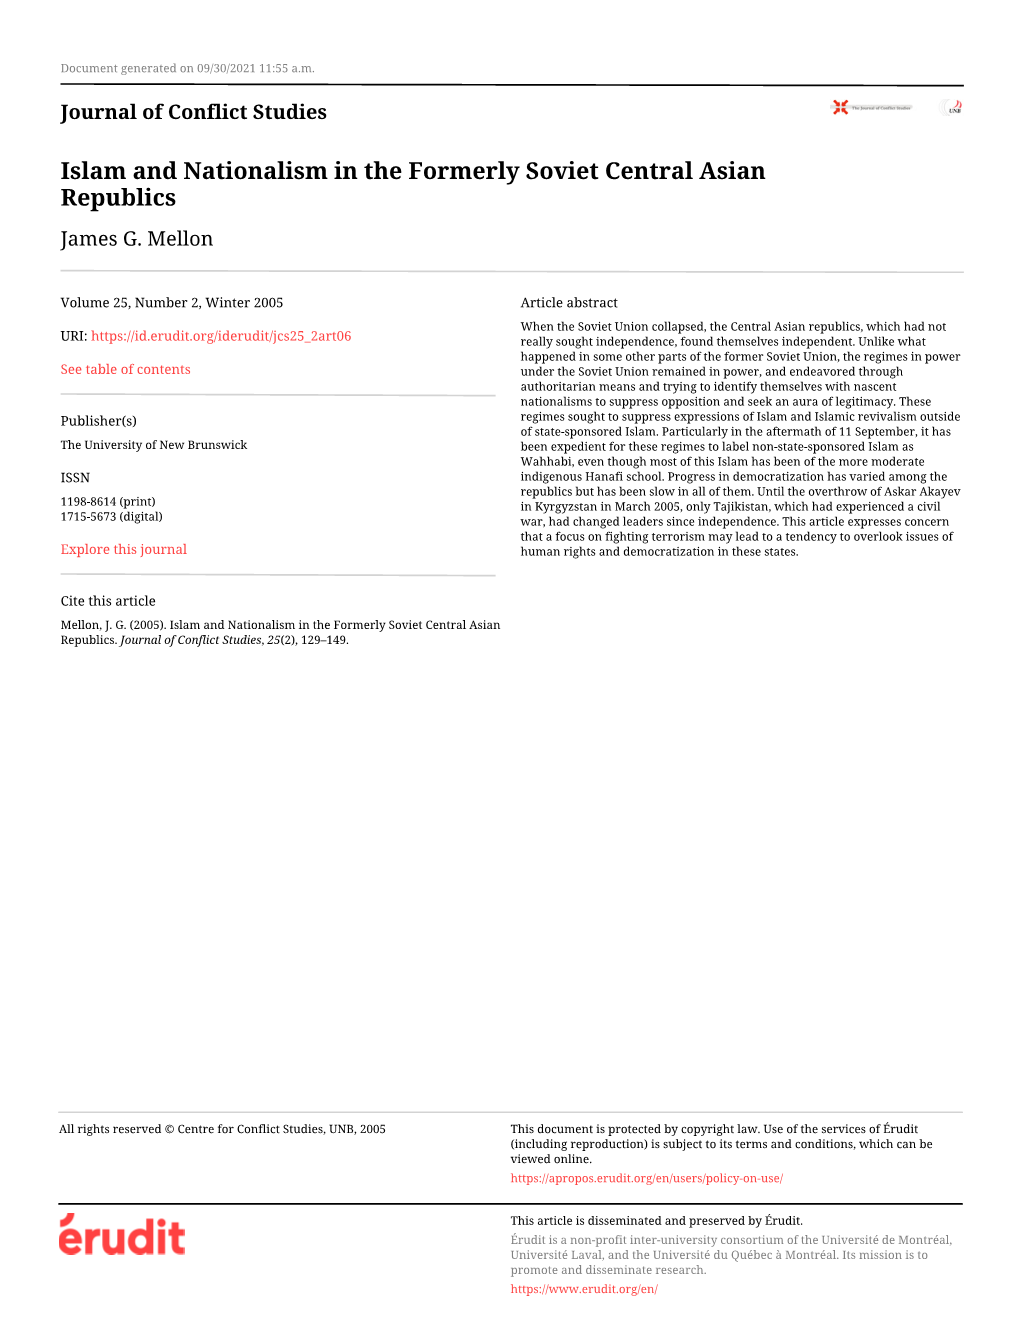 Islam and Nationalism in the Formerly Soviet Central Asian Republics James G